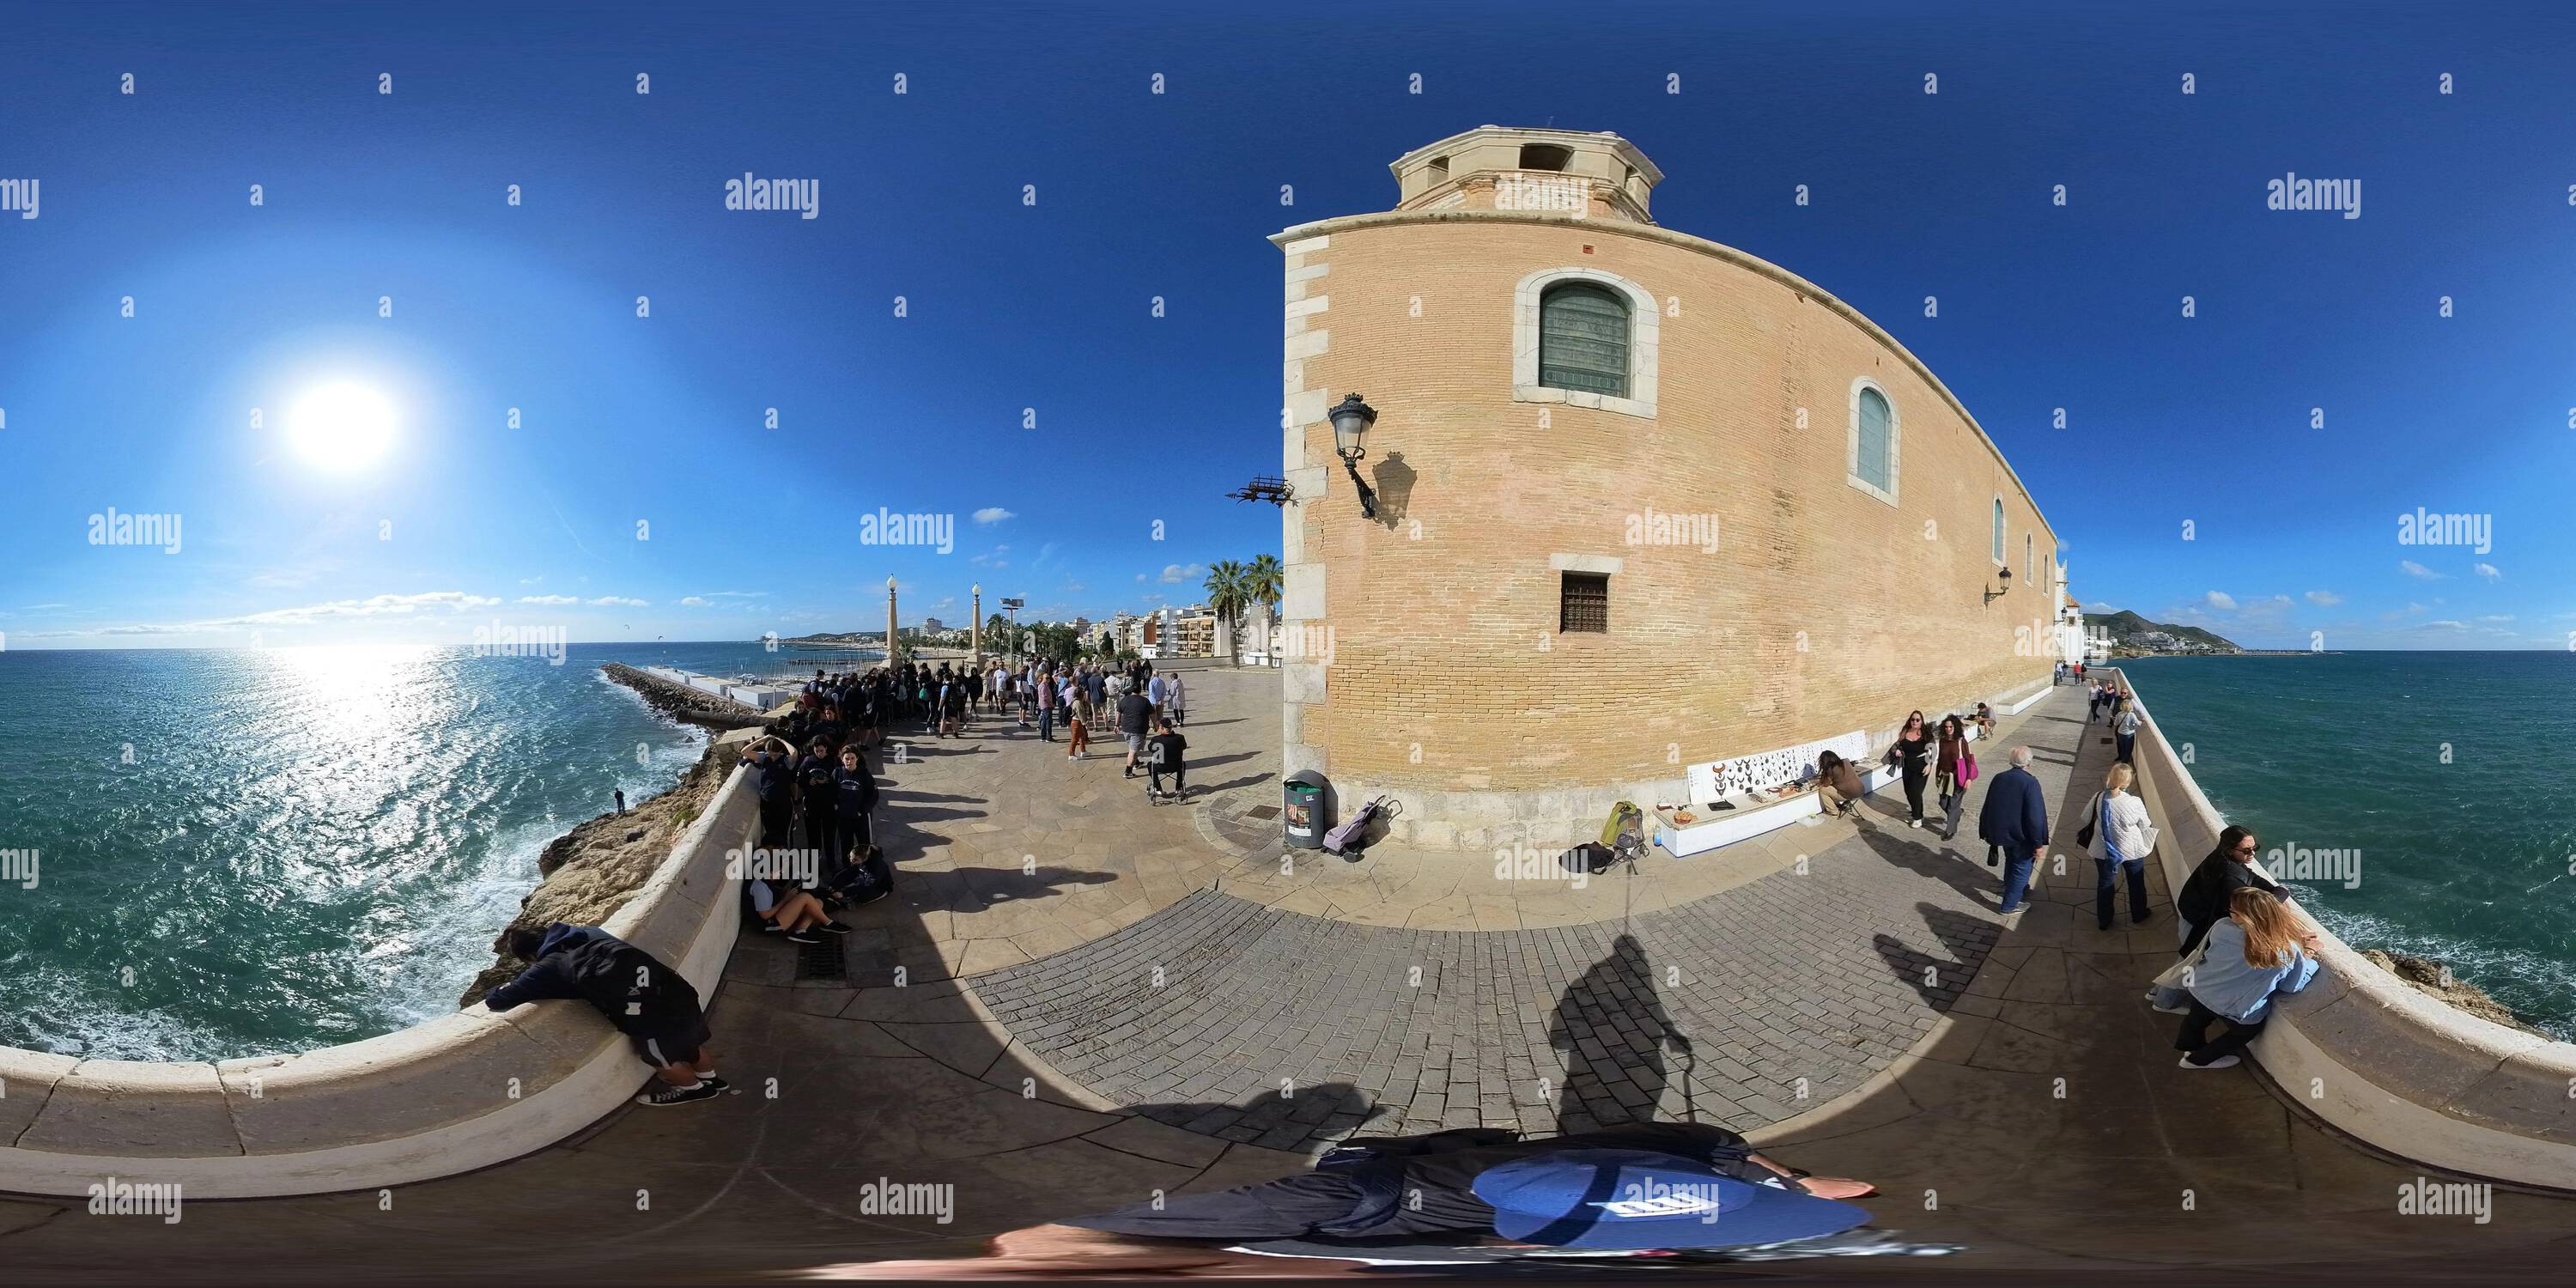 360 degree panoramic view of In Sitges, Spain near the Church of Sant Bartomeu and Santa Tecla.  Sitges is an old city on the shore of the Mediterranean Sea